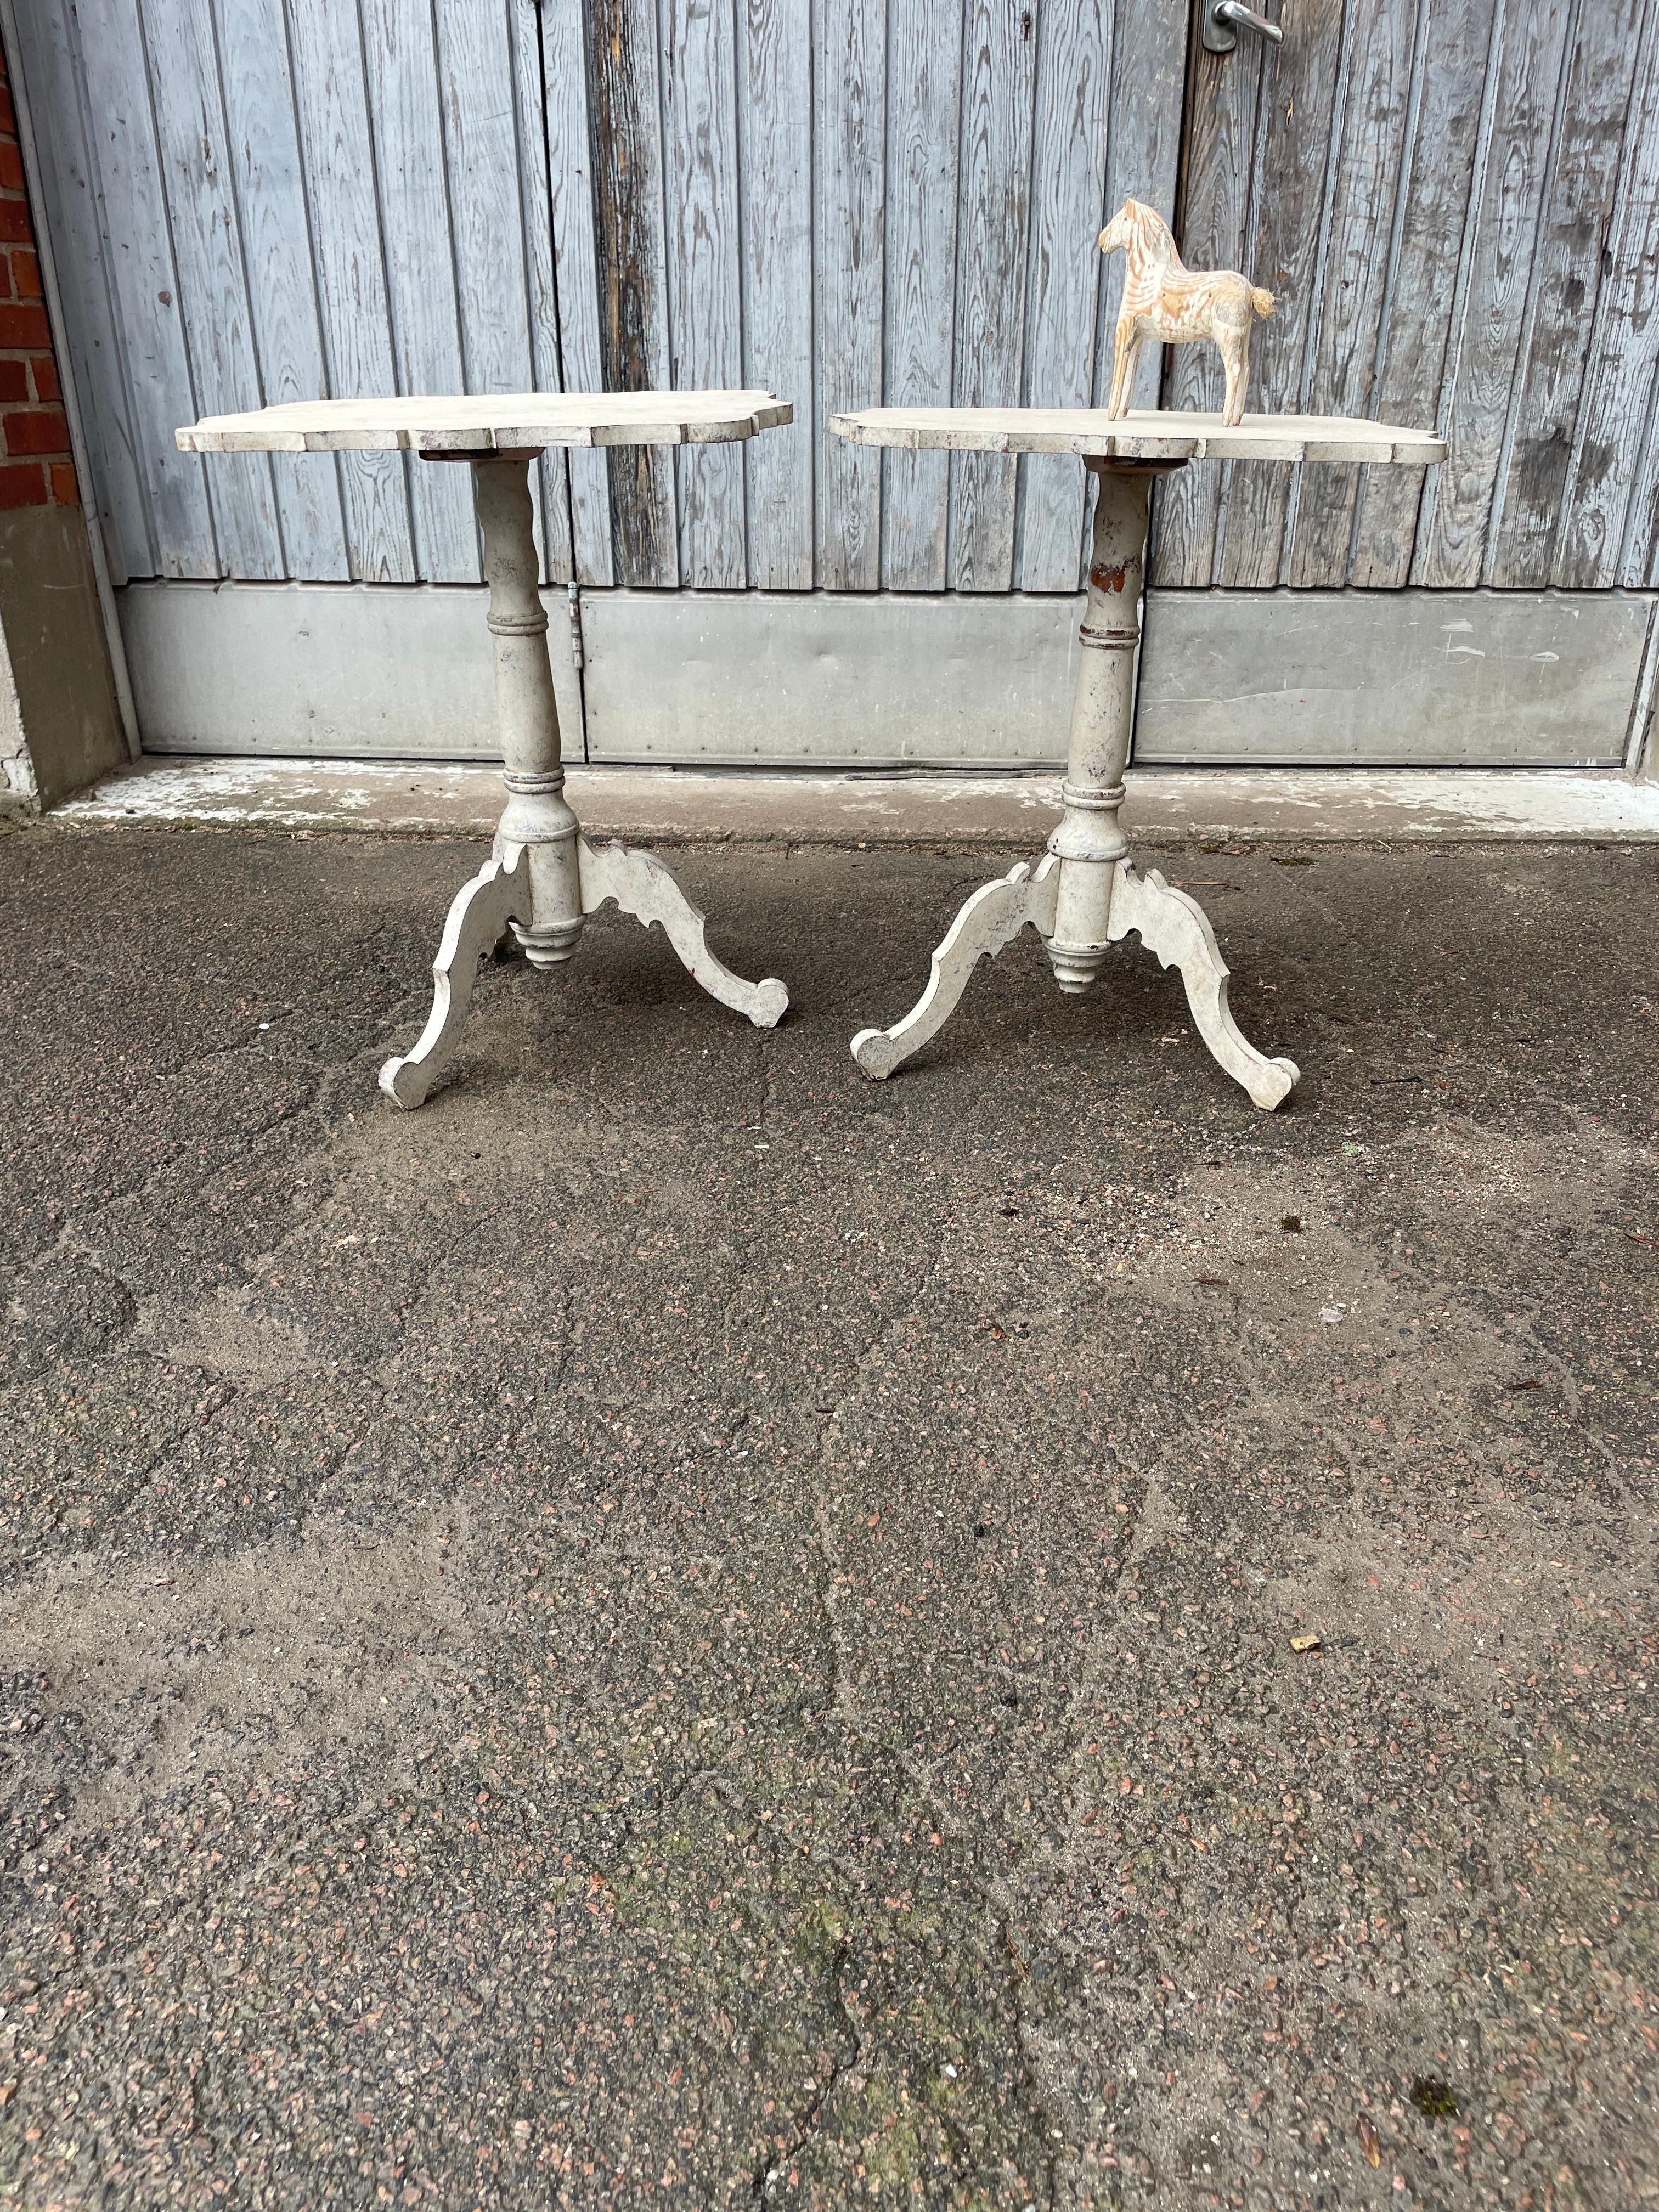 Swedish Pair of Gustavian Painted Side Lamp Tables

A fantastic pair of painted wood side tables from the early 19th Century, with  scalloped tops, turned pedestals and distressed patina. These painted guéridon tables feature elegant tops with